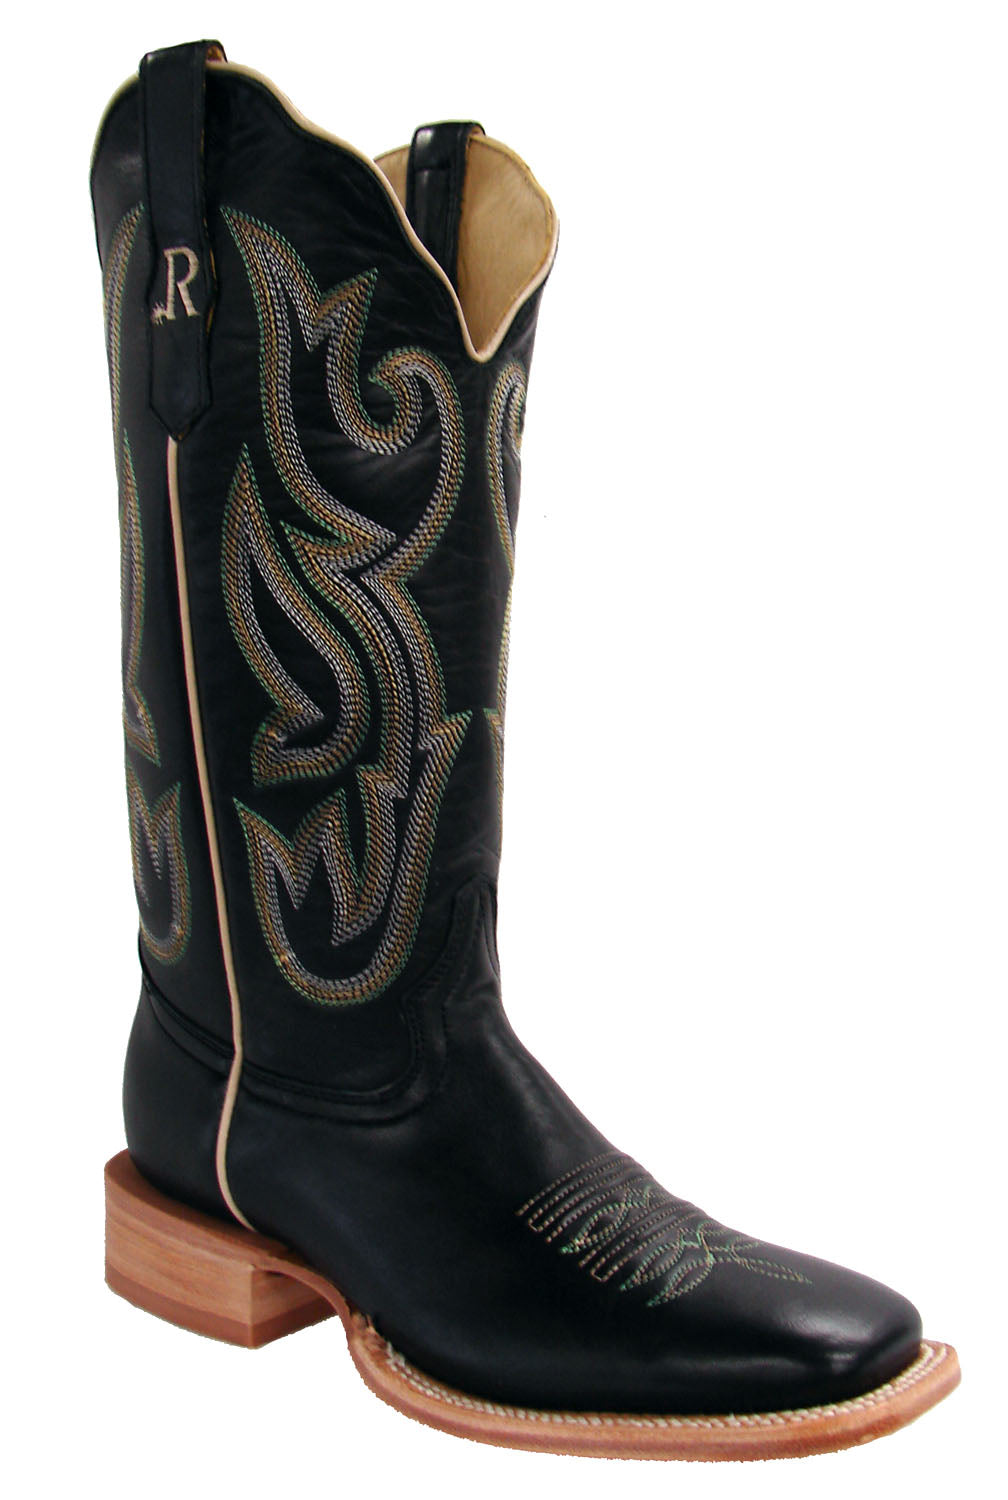 Pard's Western Shop Black Sinatra Cowhide Boots for Women from R. Watson Boots